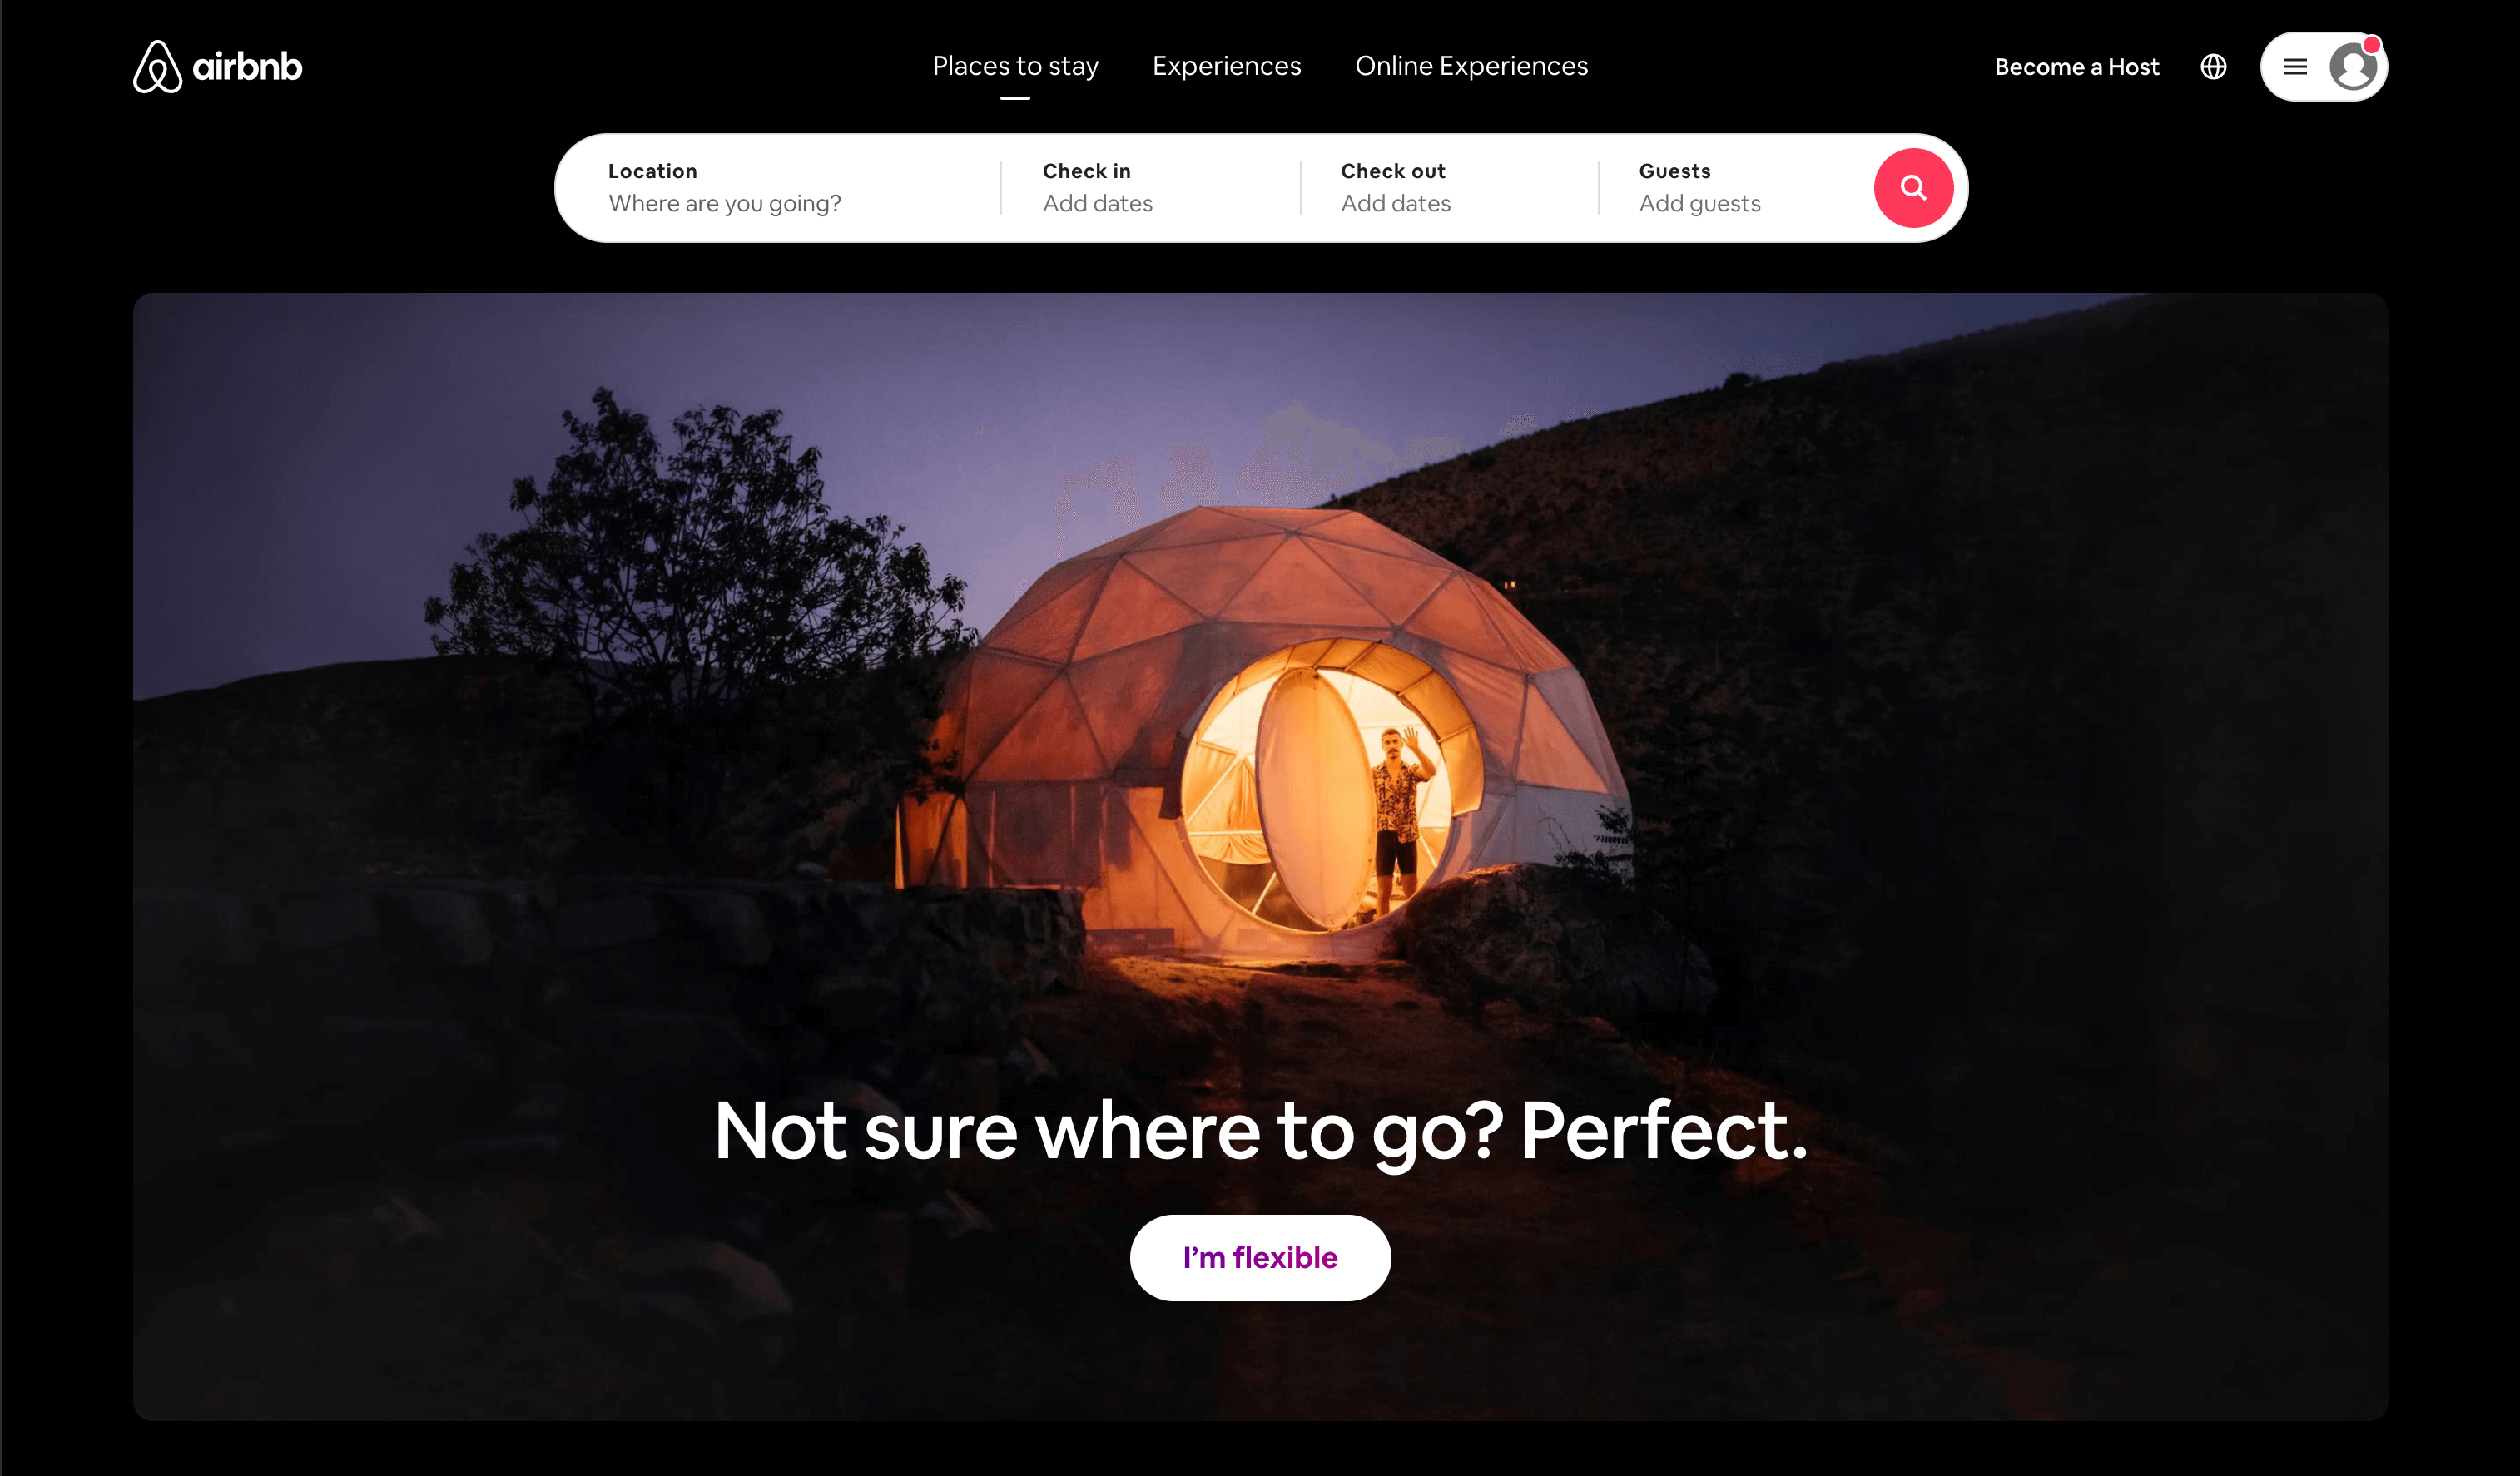 The homepage for AirBnB